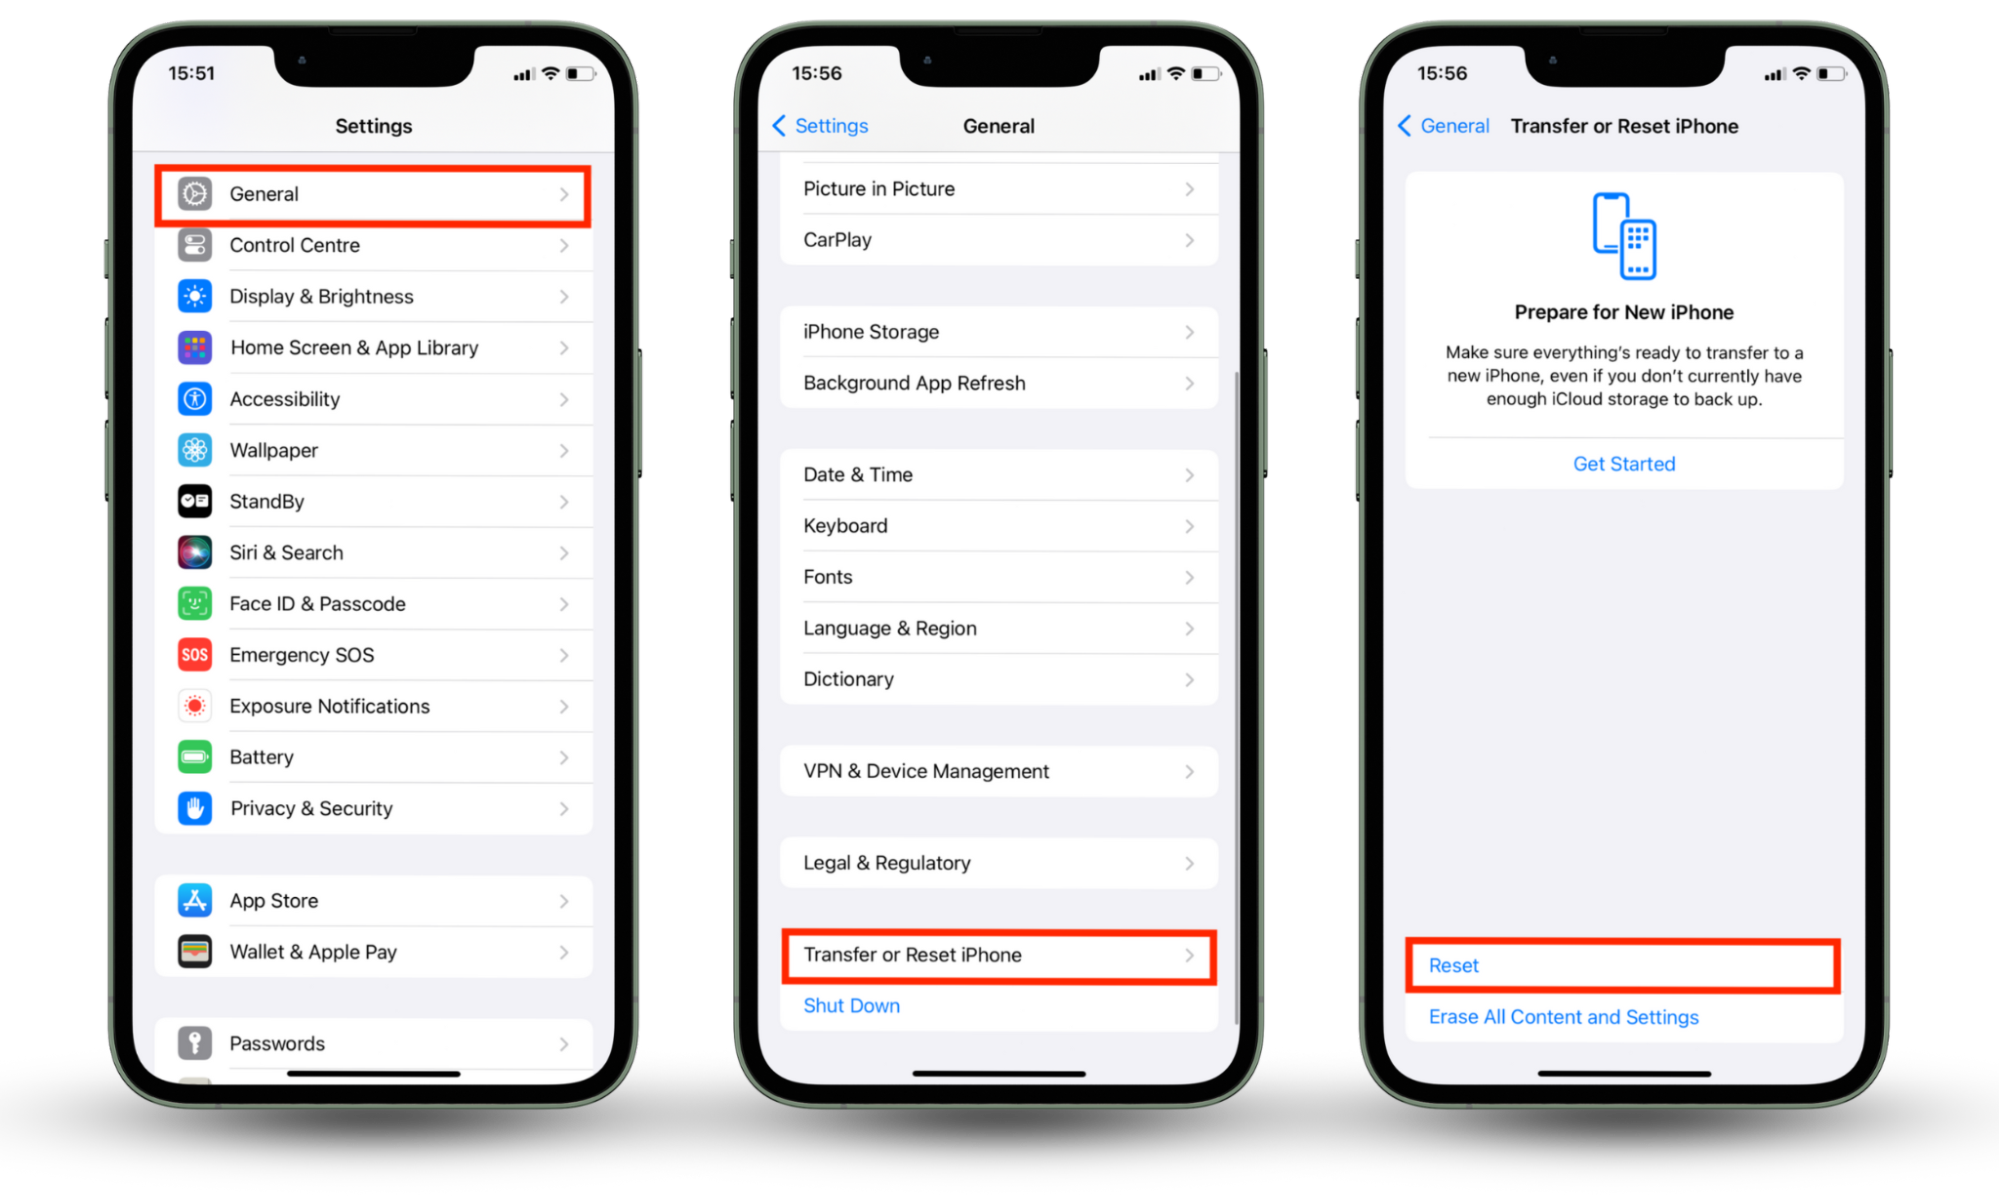 Do a factory reset to remove all traces of spyware, malware, and adware on your device. On your iPhone, go to Settings > General, then select Transfer or Reset iPhone. Choose Reset.